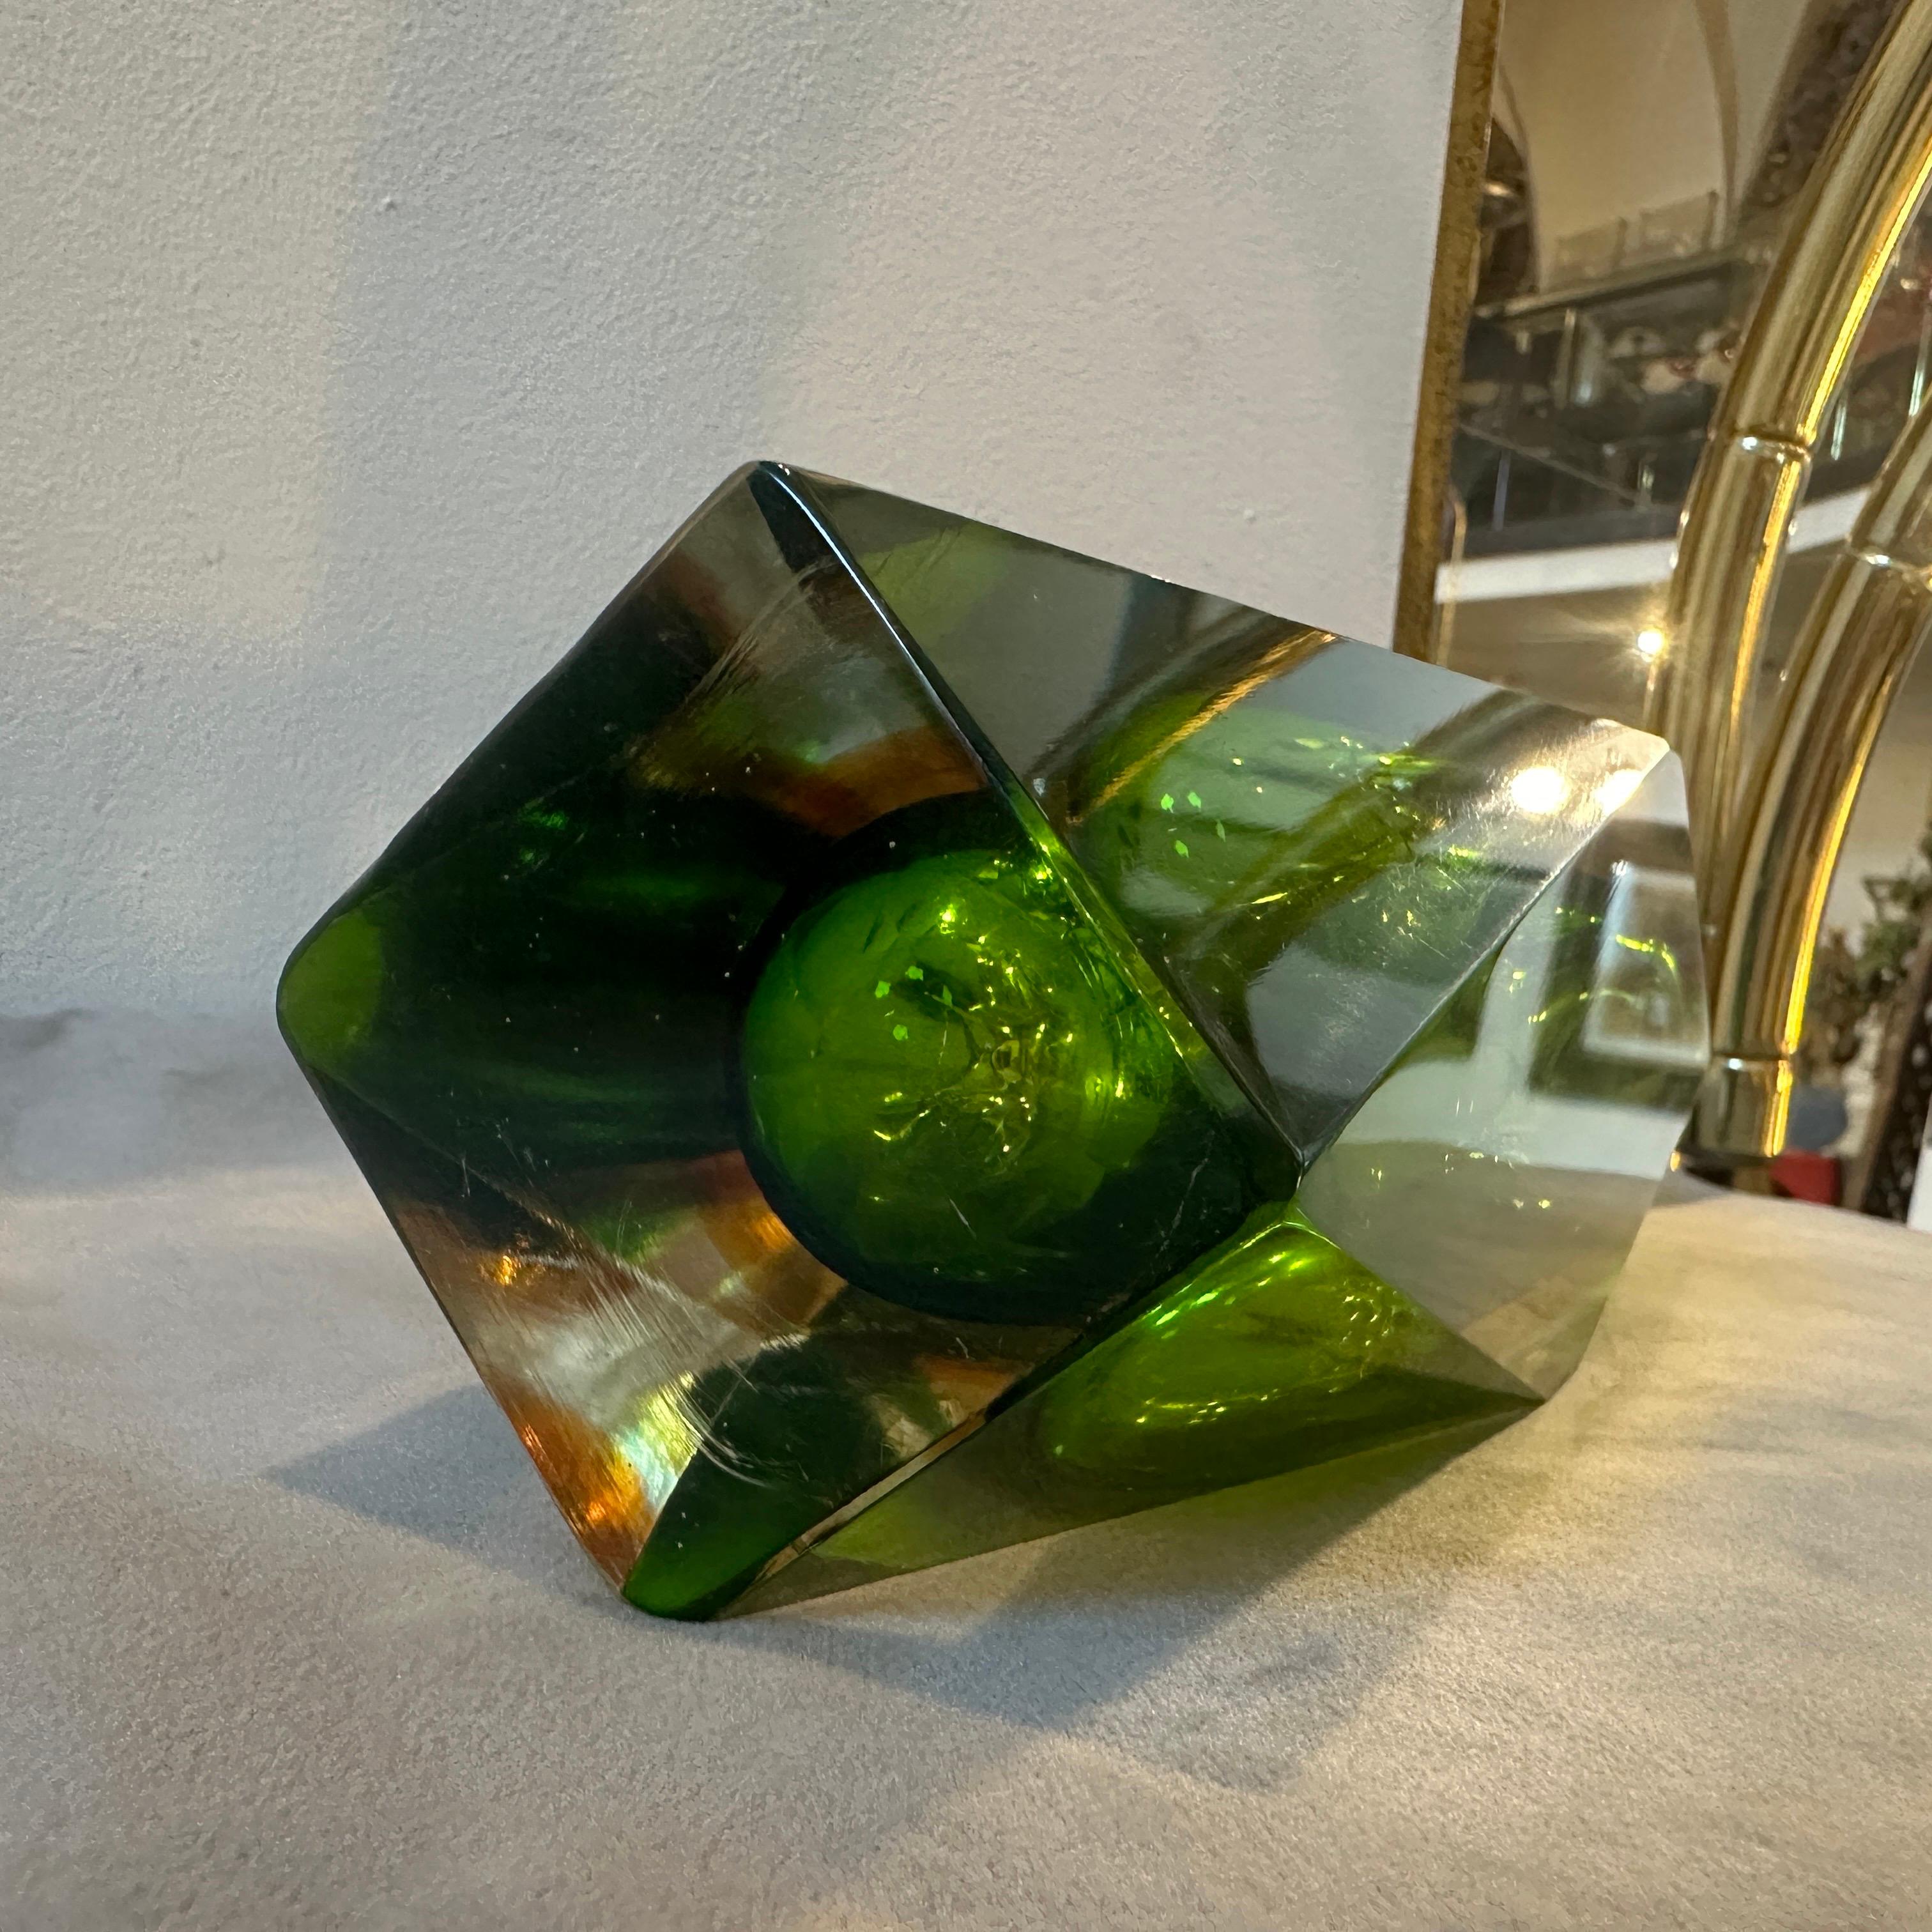 Italian 1960s Mid-Century Modern Green and Yellow Faceted Sommerso Murano Glass Vase For Sale